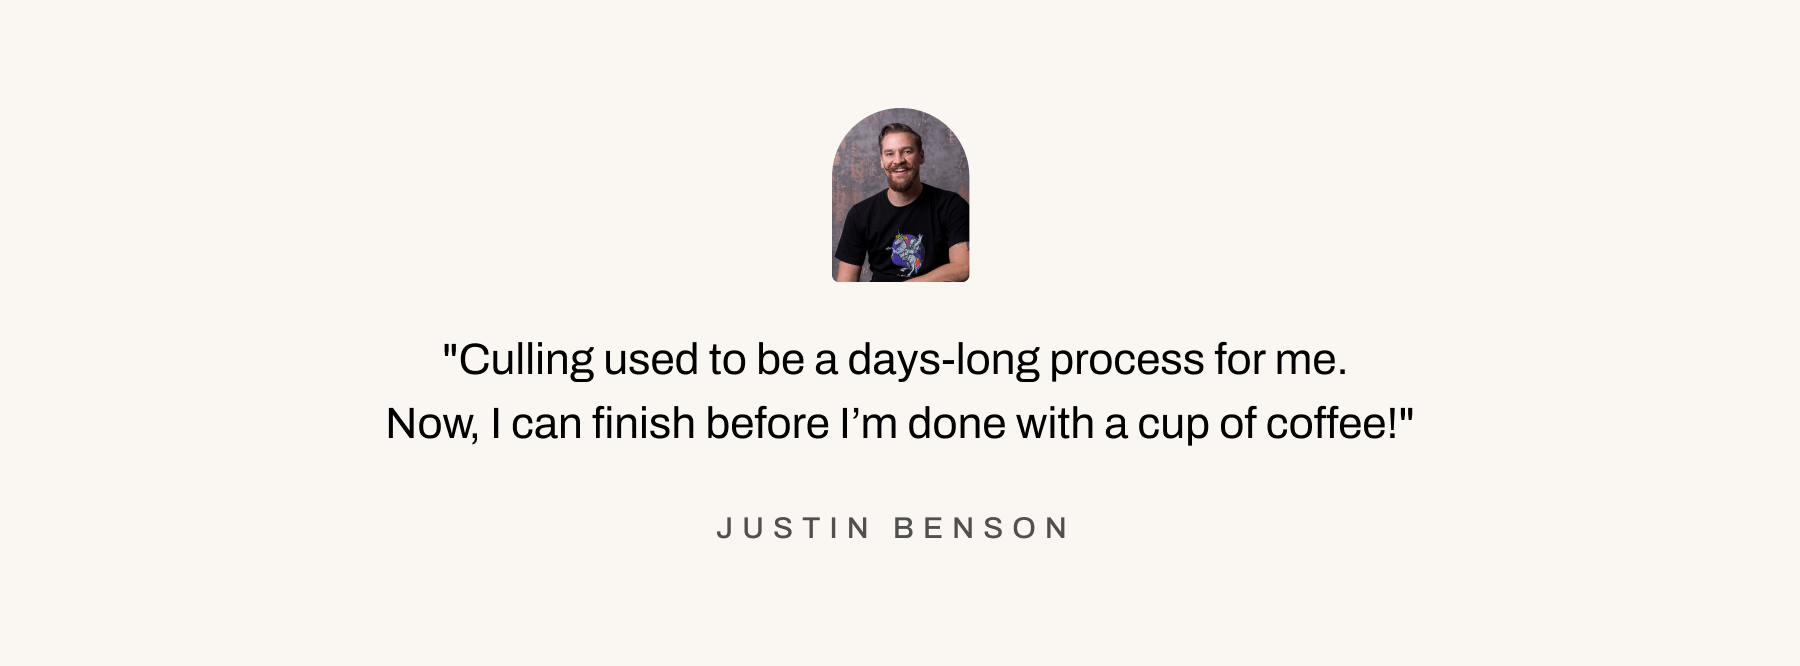 How AI transforms the culling process for Aftershoot founder, Justin Benson